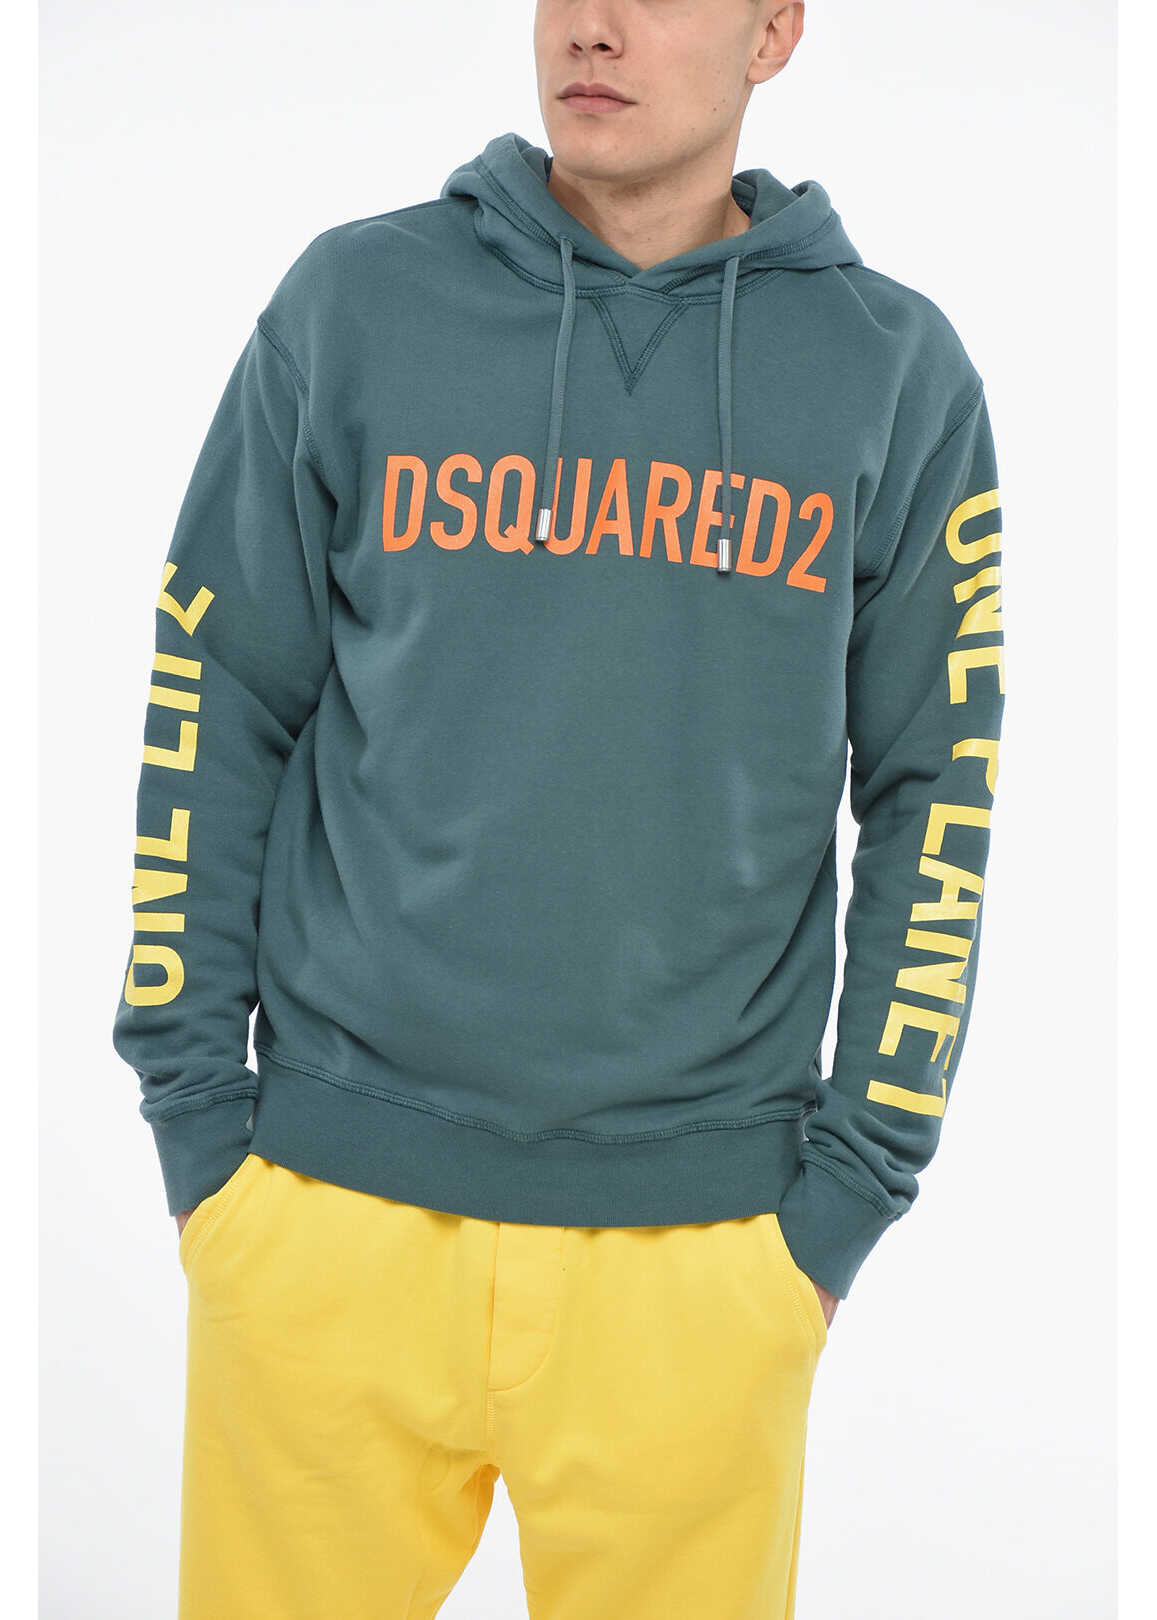 DSQUARED2 One Life One Planet Olop Hoodie Sweatshirt With Lettering Light Blue